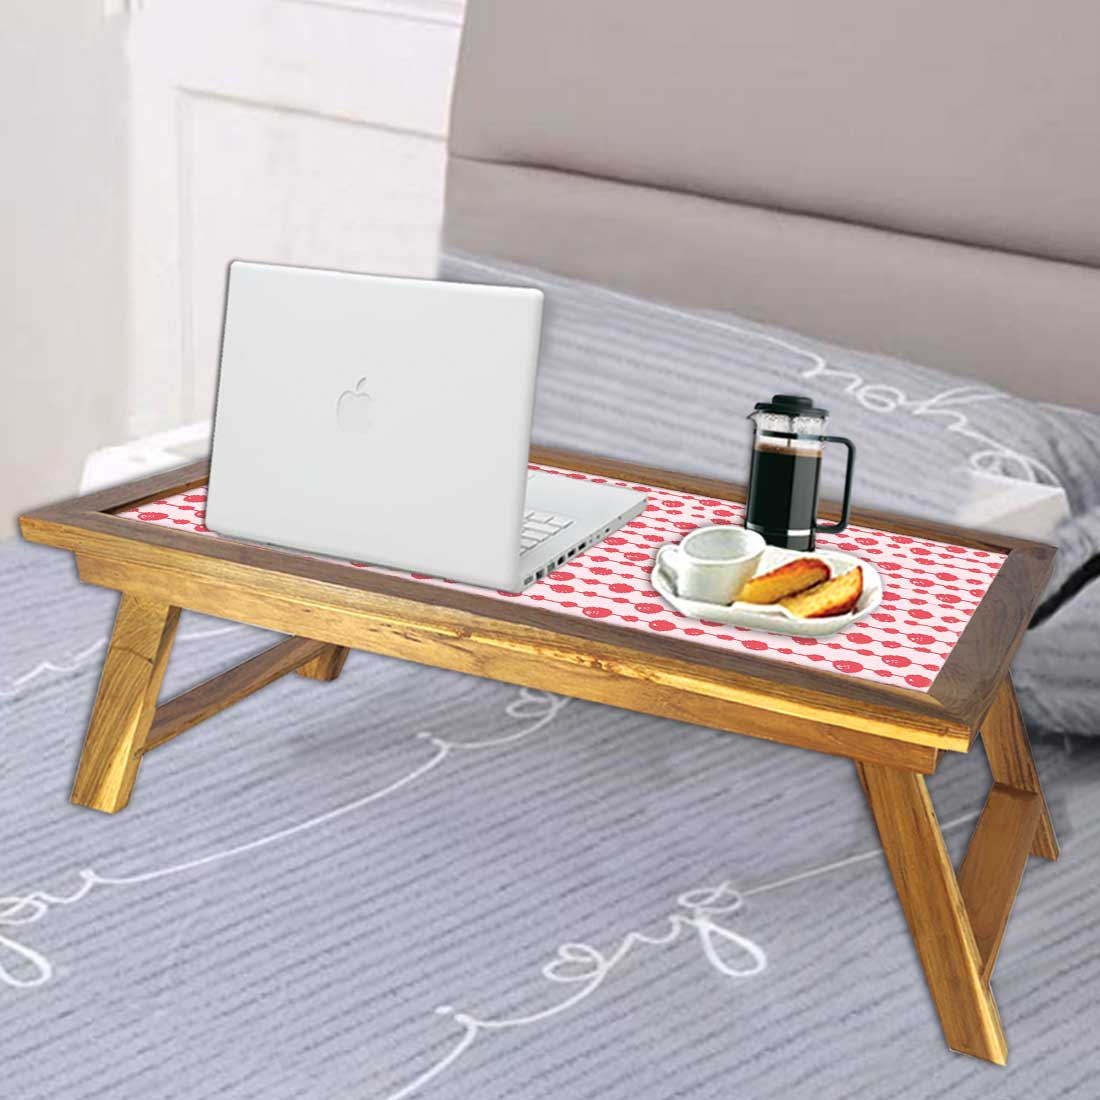 Nutcase Folding Laptop Table For Home Bed Lapdesk Breakfast Table Foldable Teak Wooden Study Desk - Pink White Dots Nutcase